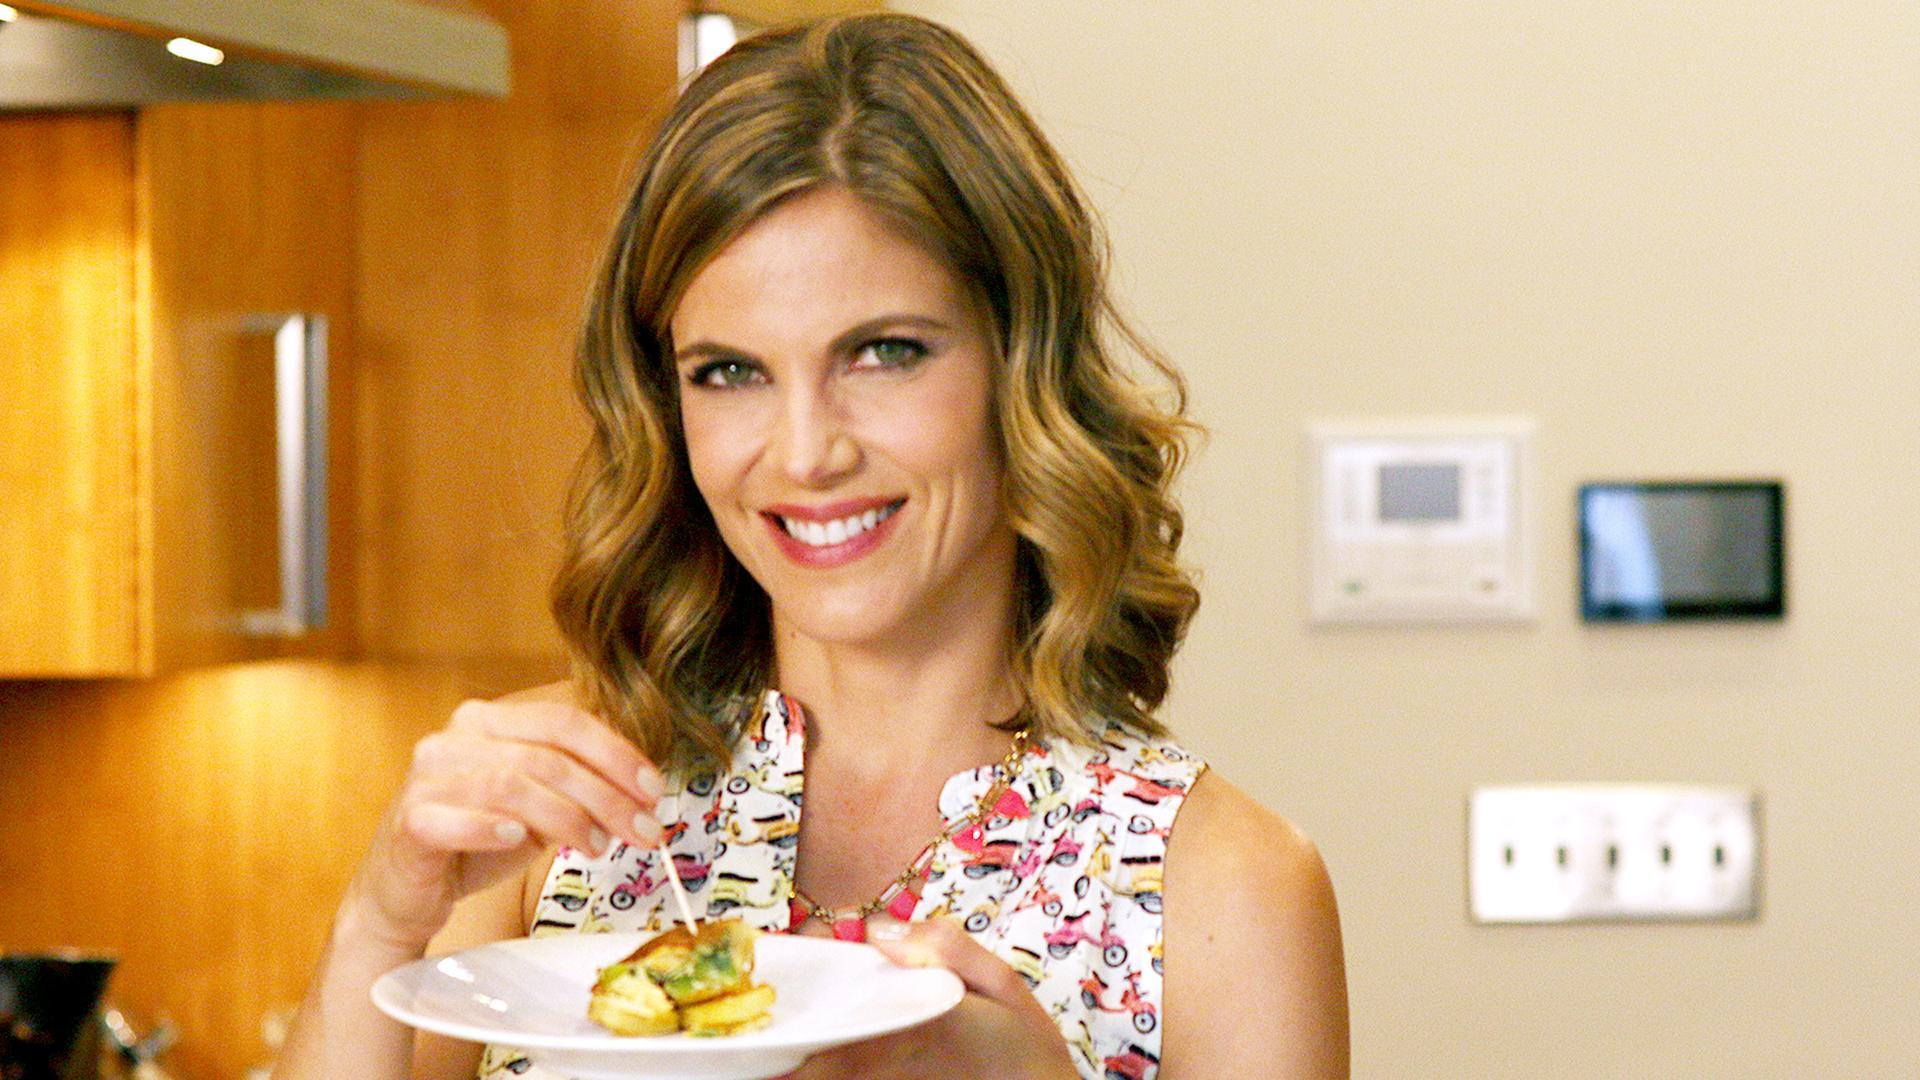 Natalie Morales shows us how to make tortilla espanola in her kitchen